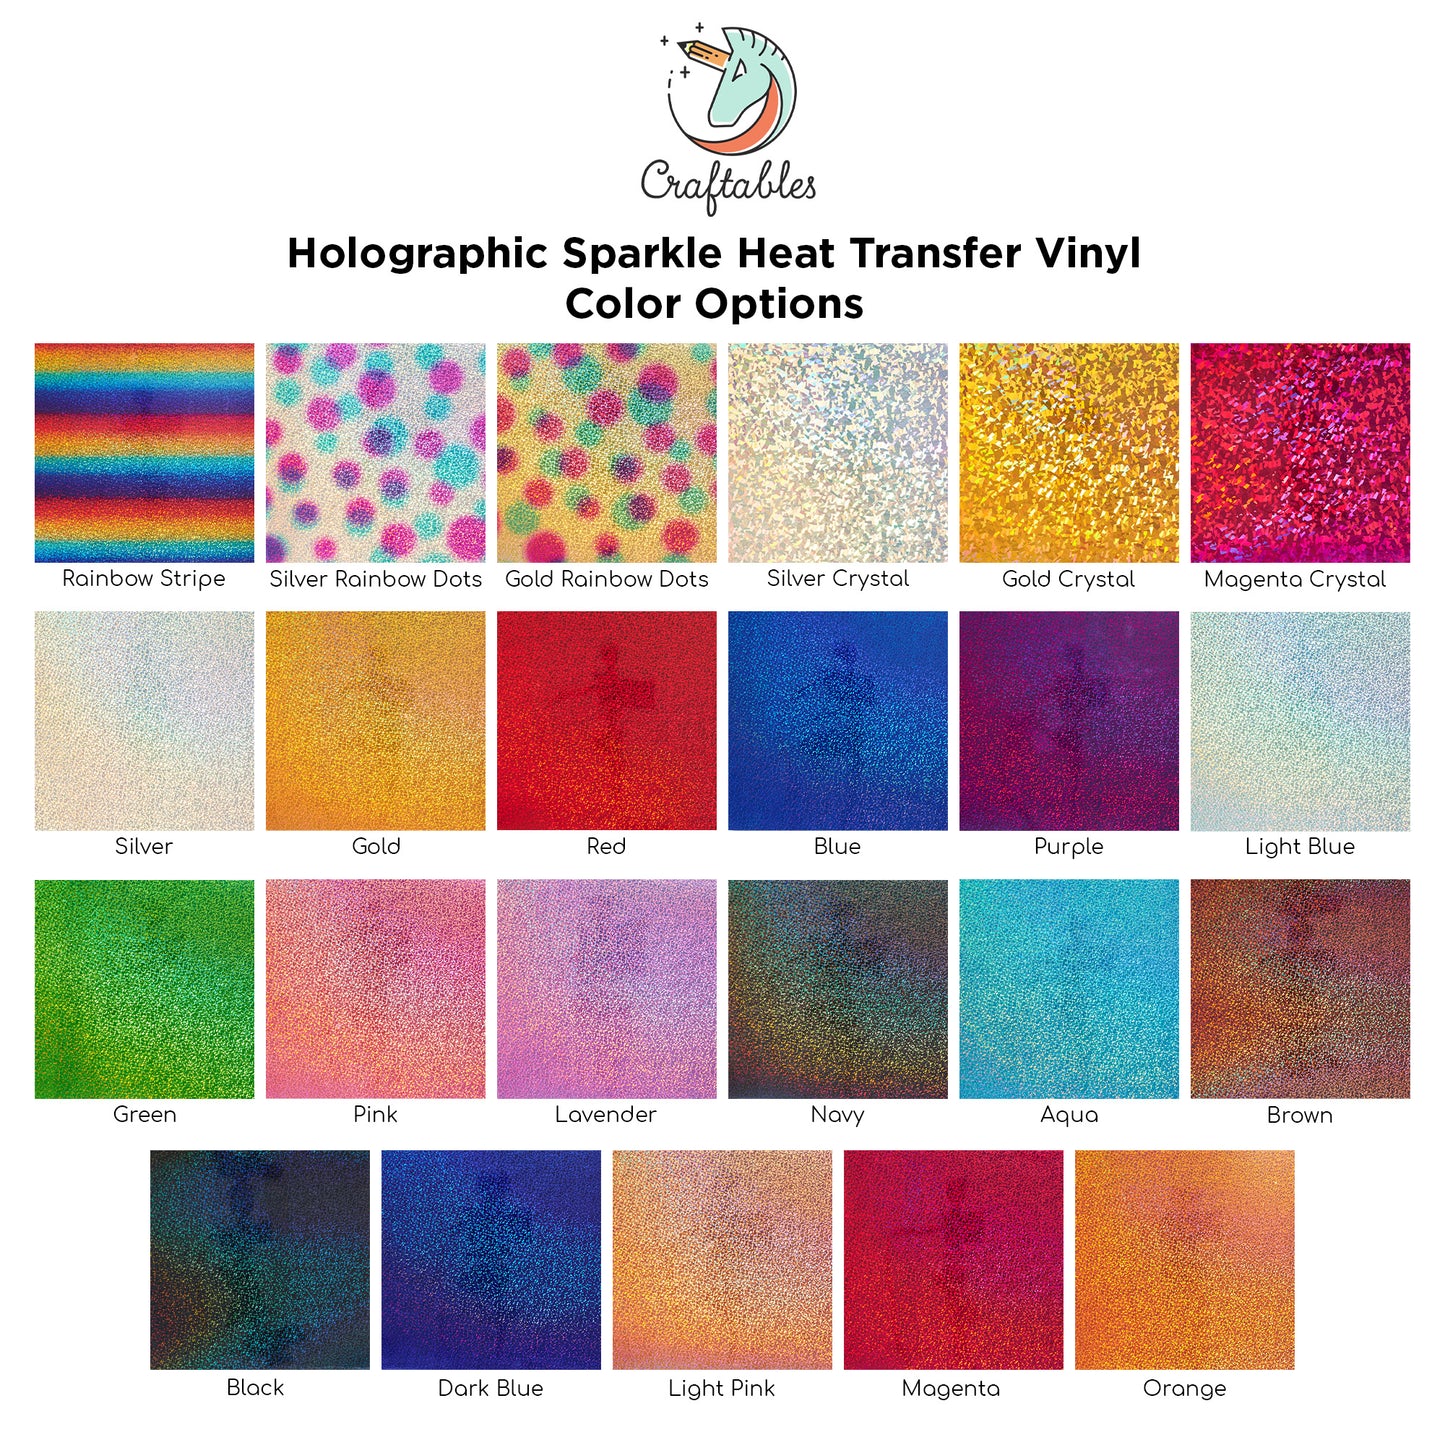 Light Blue Holographic Sparkle Heat Transfer Vinyl Sheets By Craftables